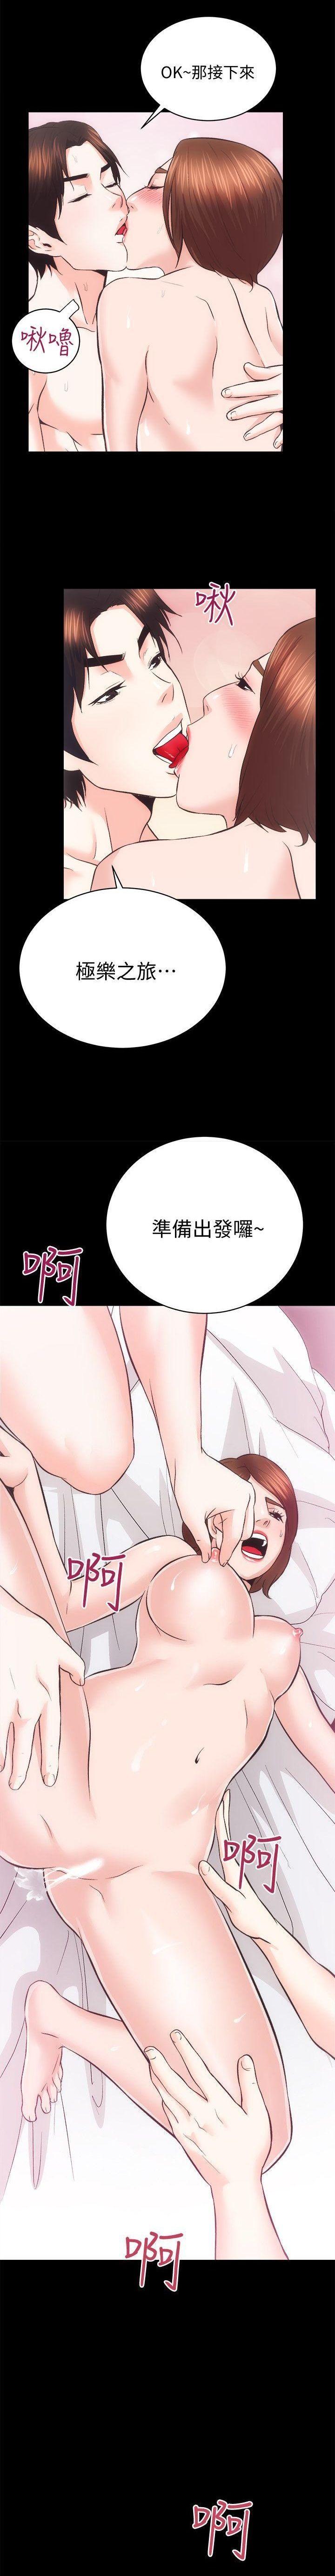 Passivo 性溢房屋 Chapter 21-25 Caliente - Page 52